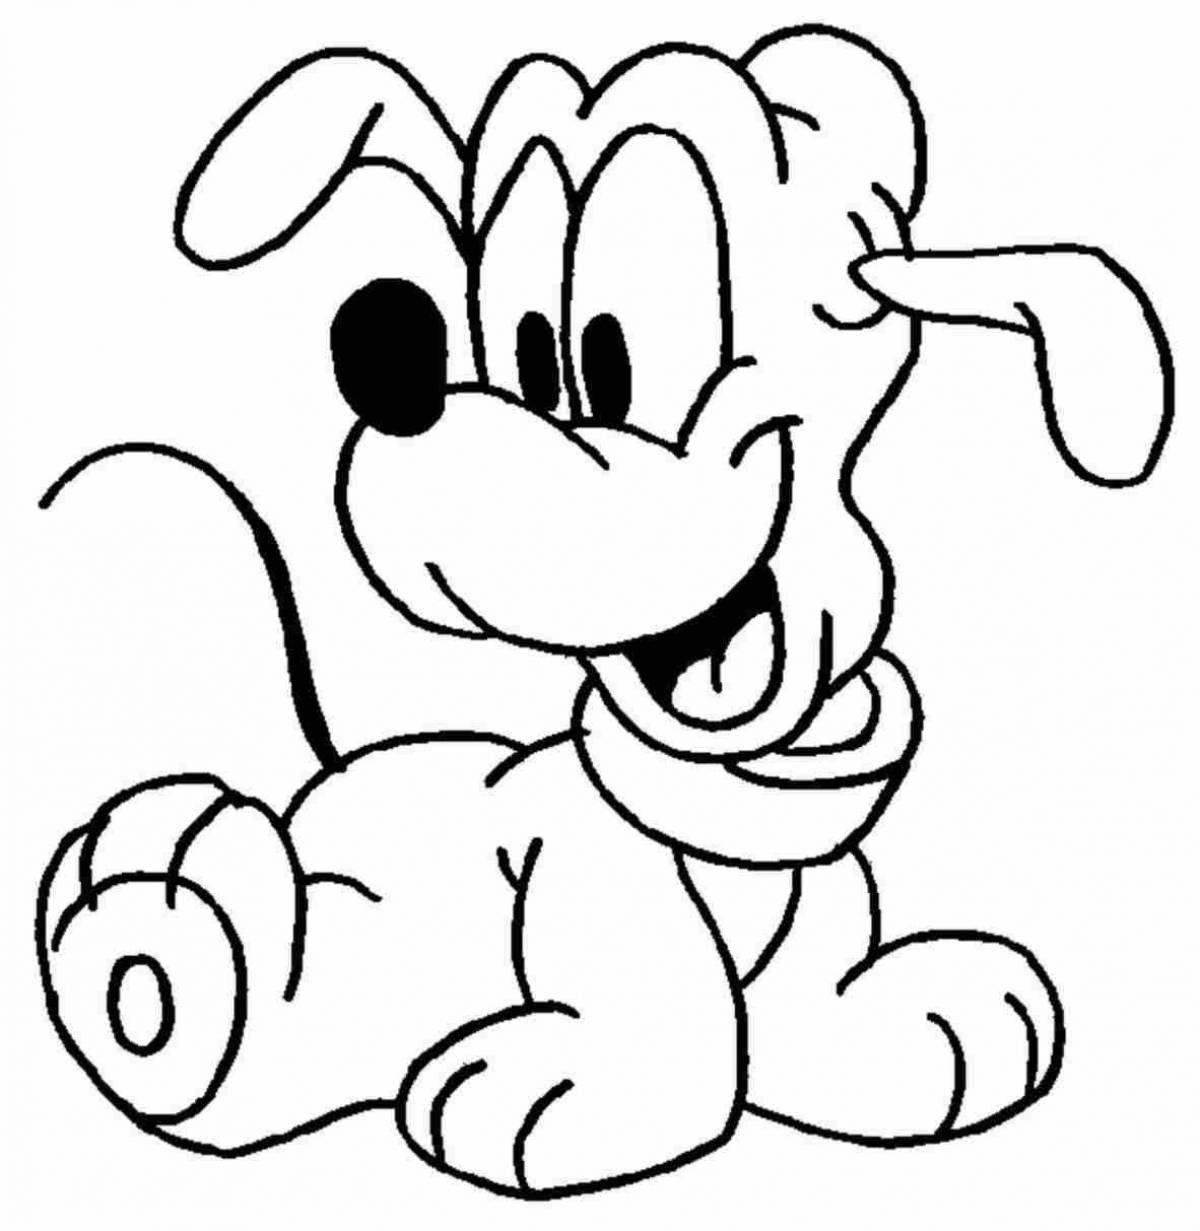 Color-blast cartoon coloring page for kids